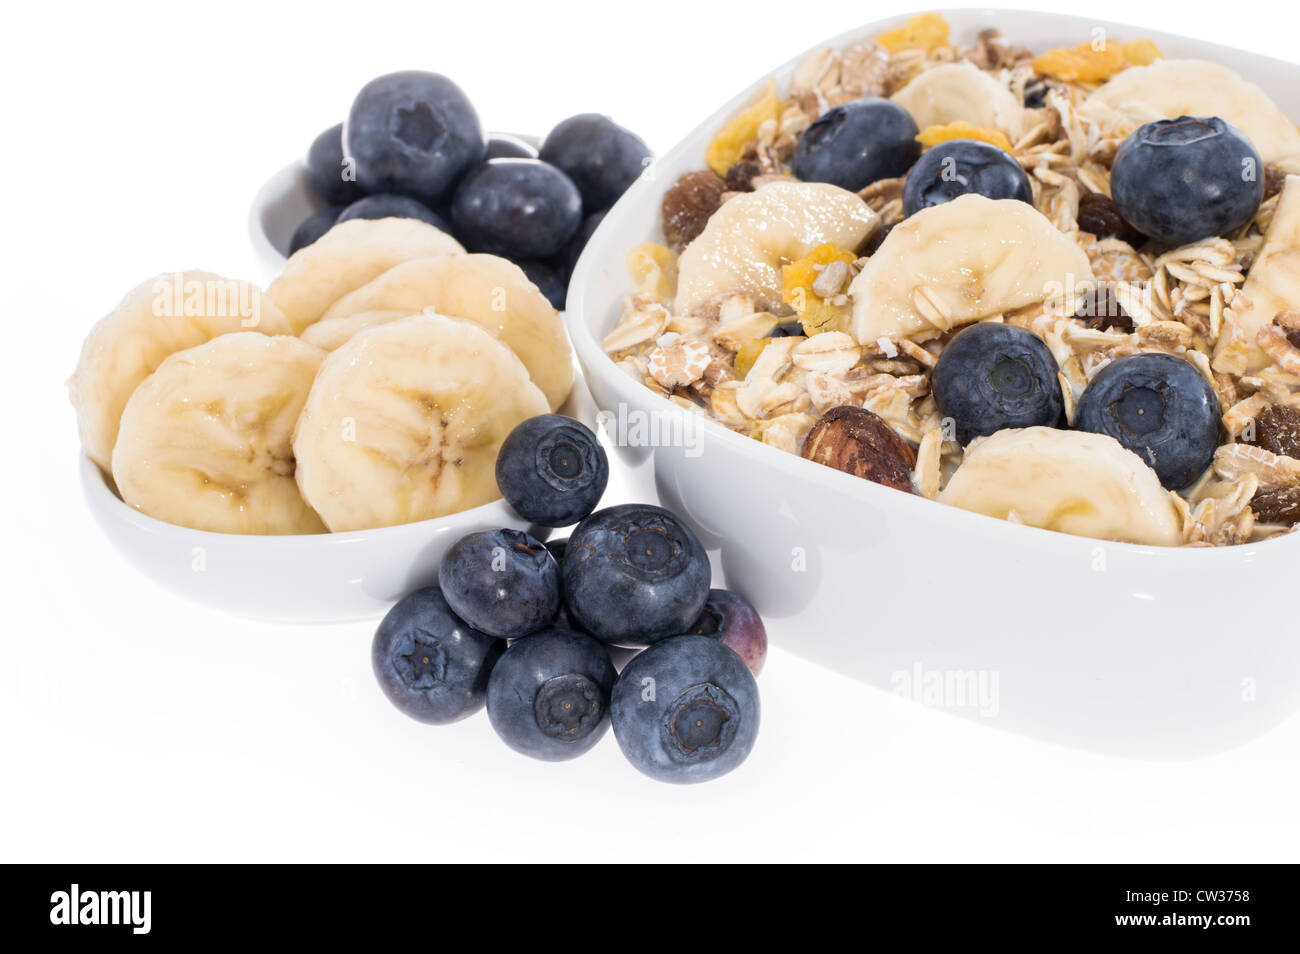 Mixed Muesli with Blueberries and Bananas isolated on white background Stock Photo